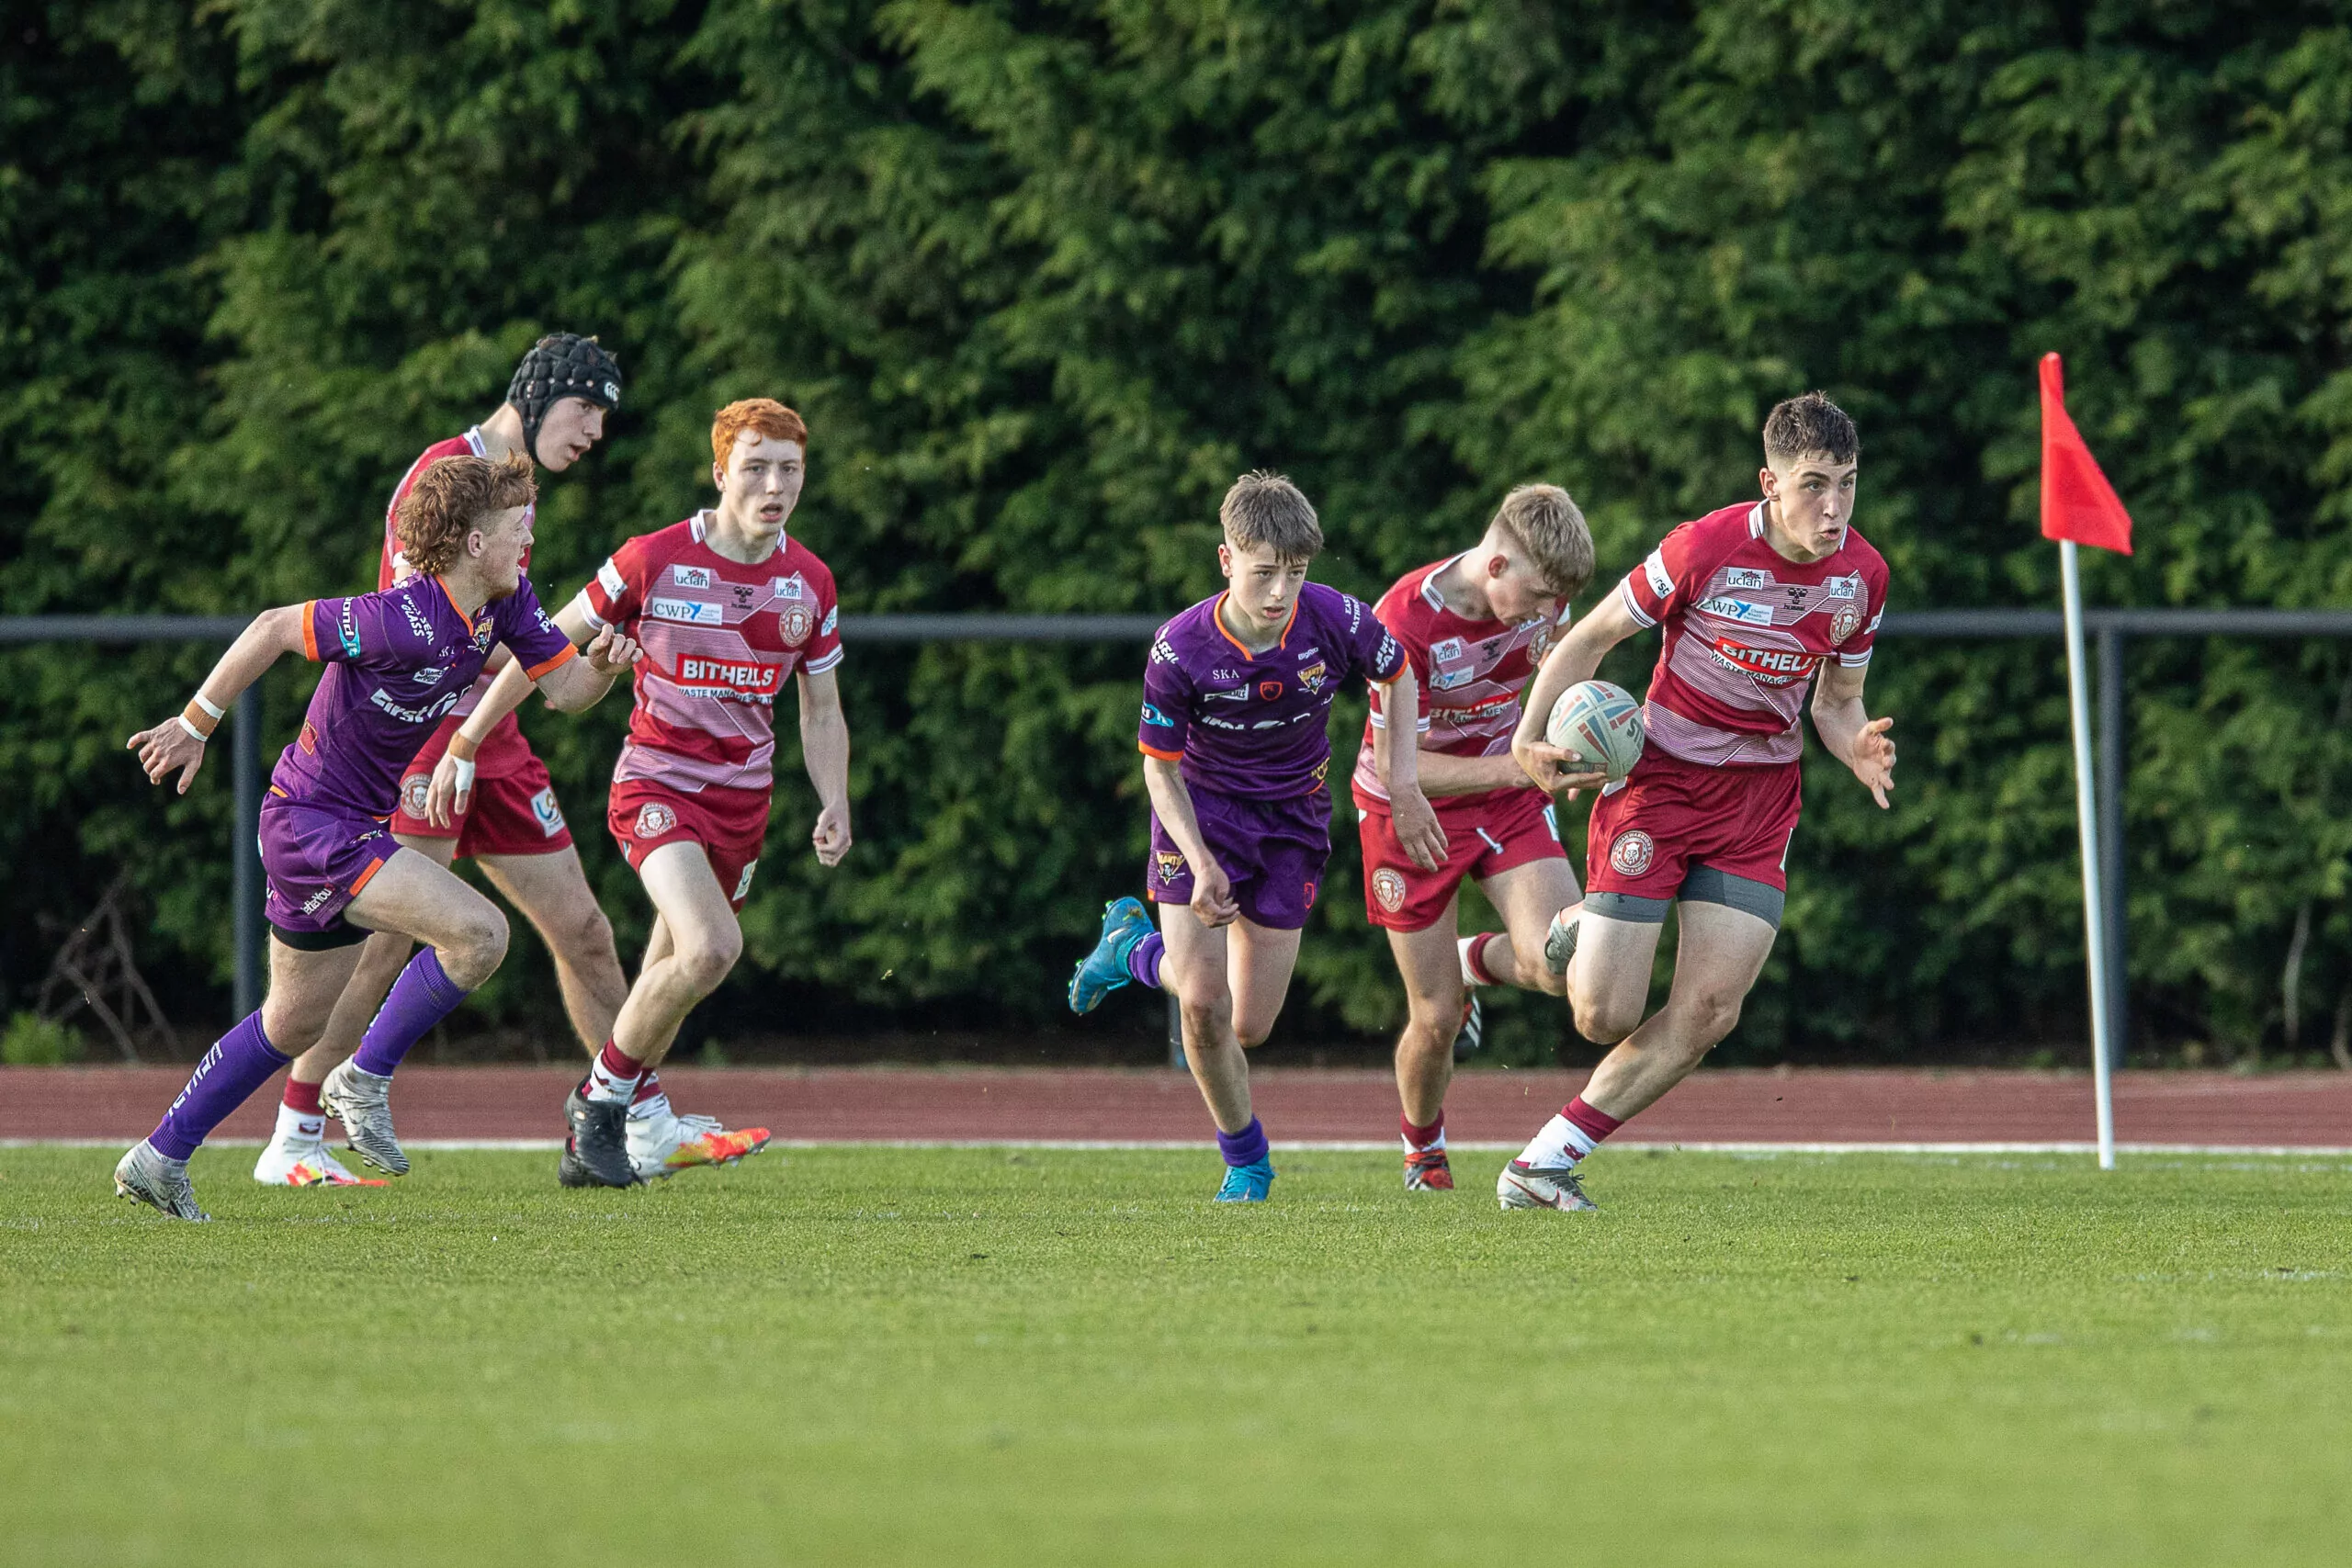 Wigan Warriors Education playing opportunities